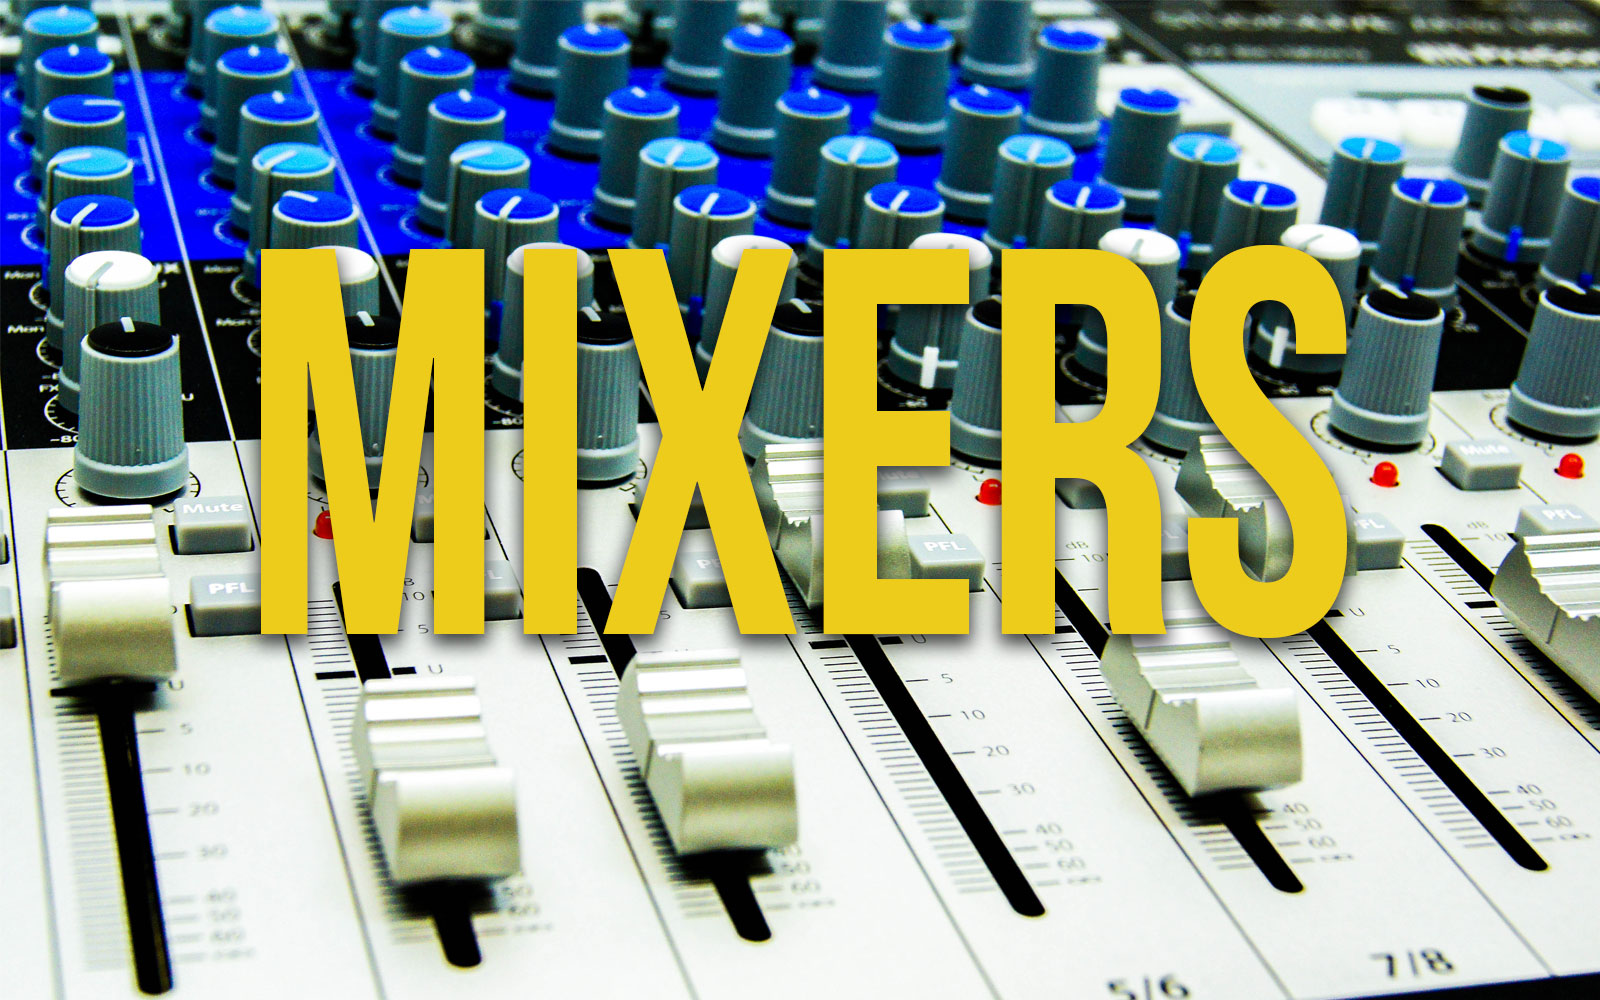 EMX7/EMX5 - Overview - Mixers - Professional Audio - Products - Yamaha USA